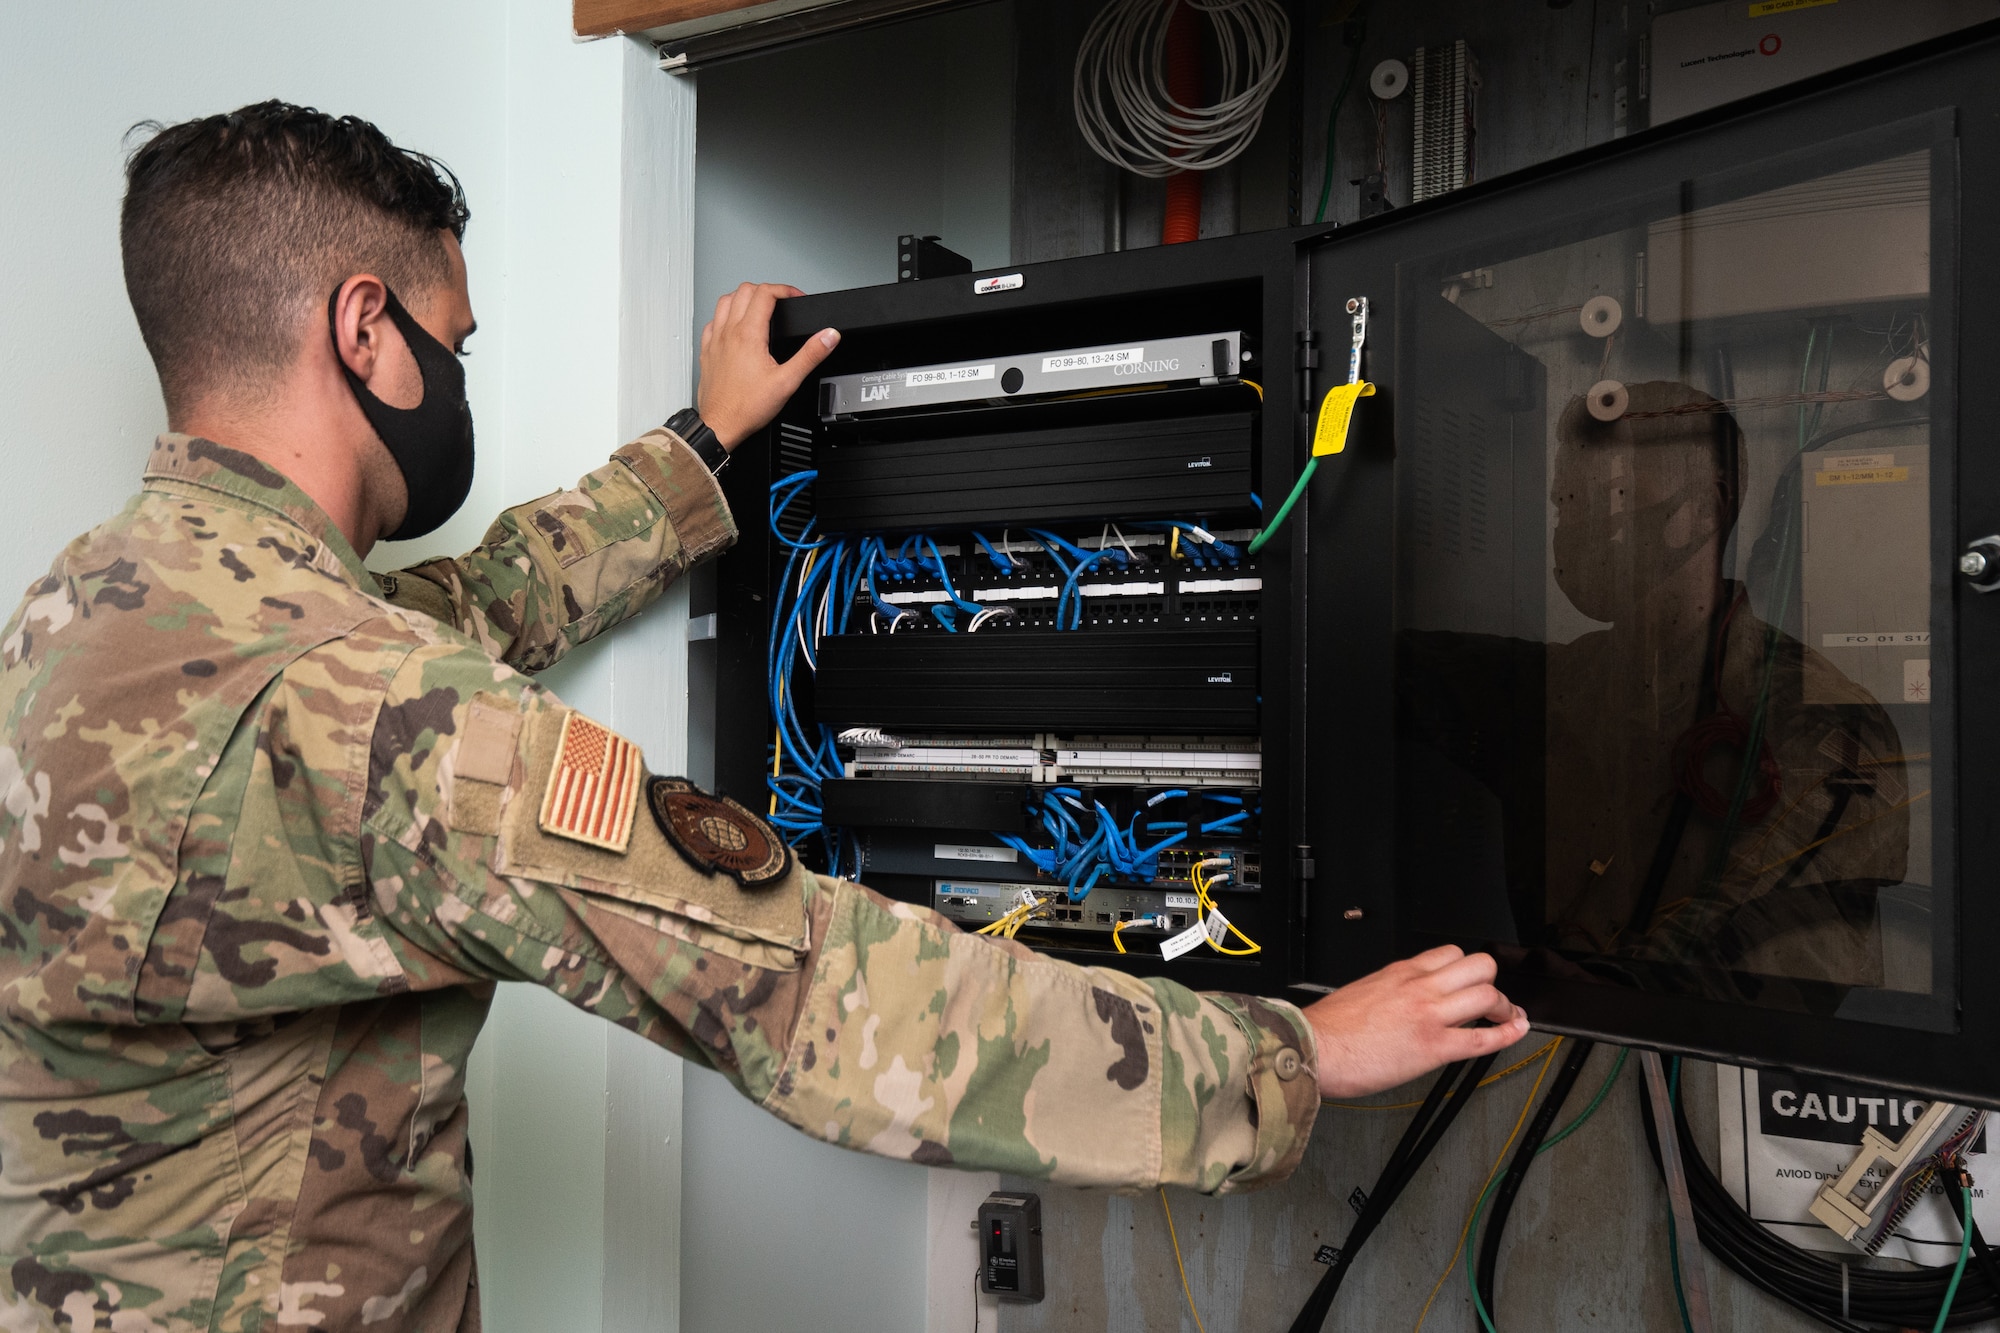 U.S. Air Force Tech. Sgt. Charles Chalk, a team chief nominee with the 202d Engineering Installation Squadron (EIS), 116th Air Control Wing, Georgia Air National Guard, inspects a data rack to verify there is room to install additional fiber optic cables during a large-scale communications infrastructure project at Muñiz Air National Guard Base, Puerto Rico, July 24, 2020. The 202d EIS is leading the project which includes multiple Air National Guard EIS units. The Airmen are relocating multiple communication systems’ cables and equipment to hardened facilities as part of the on-going recovery efforts in response to damage sustained during Hurricanes Irma and Maria. (U.S. Air National Guard photo by Senior Master Sgt. Roger Parsons)